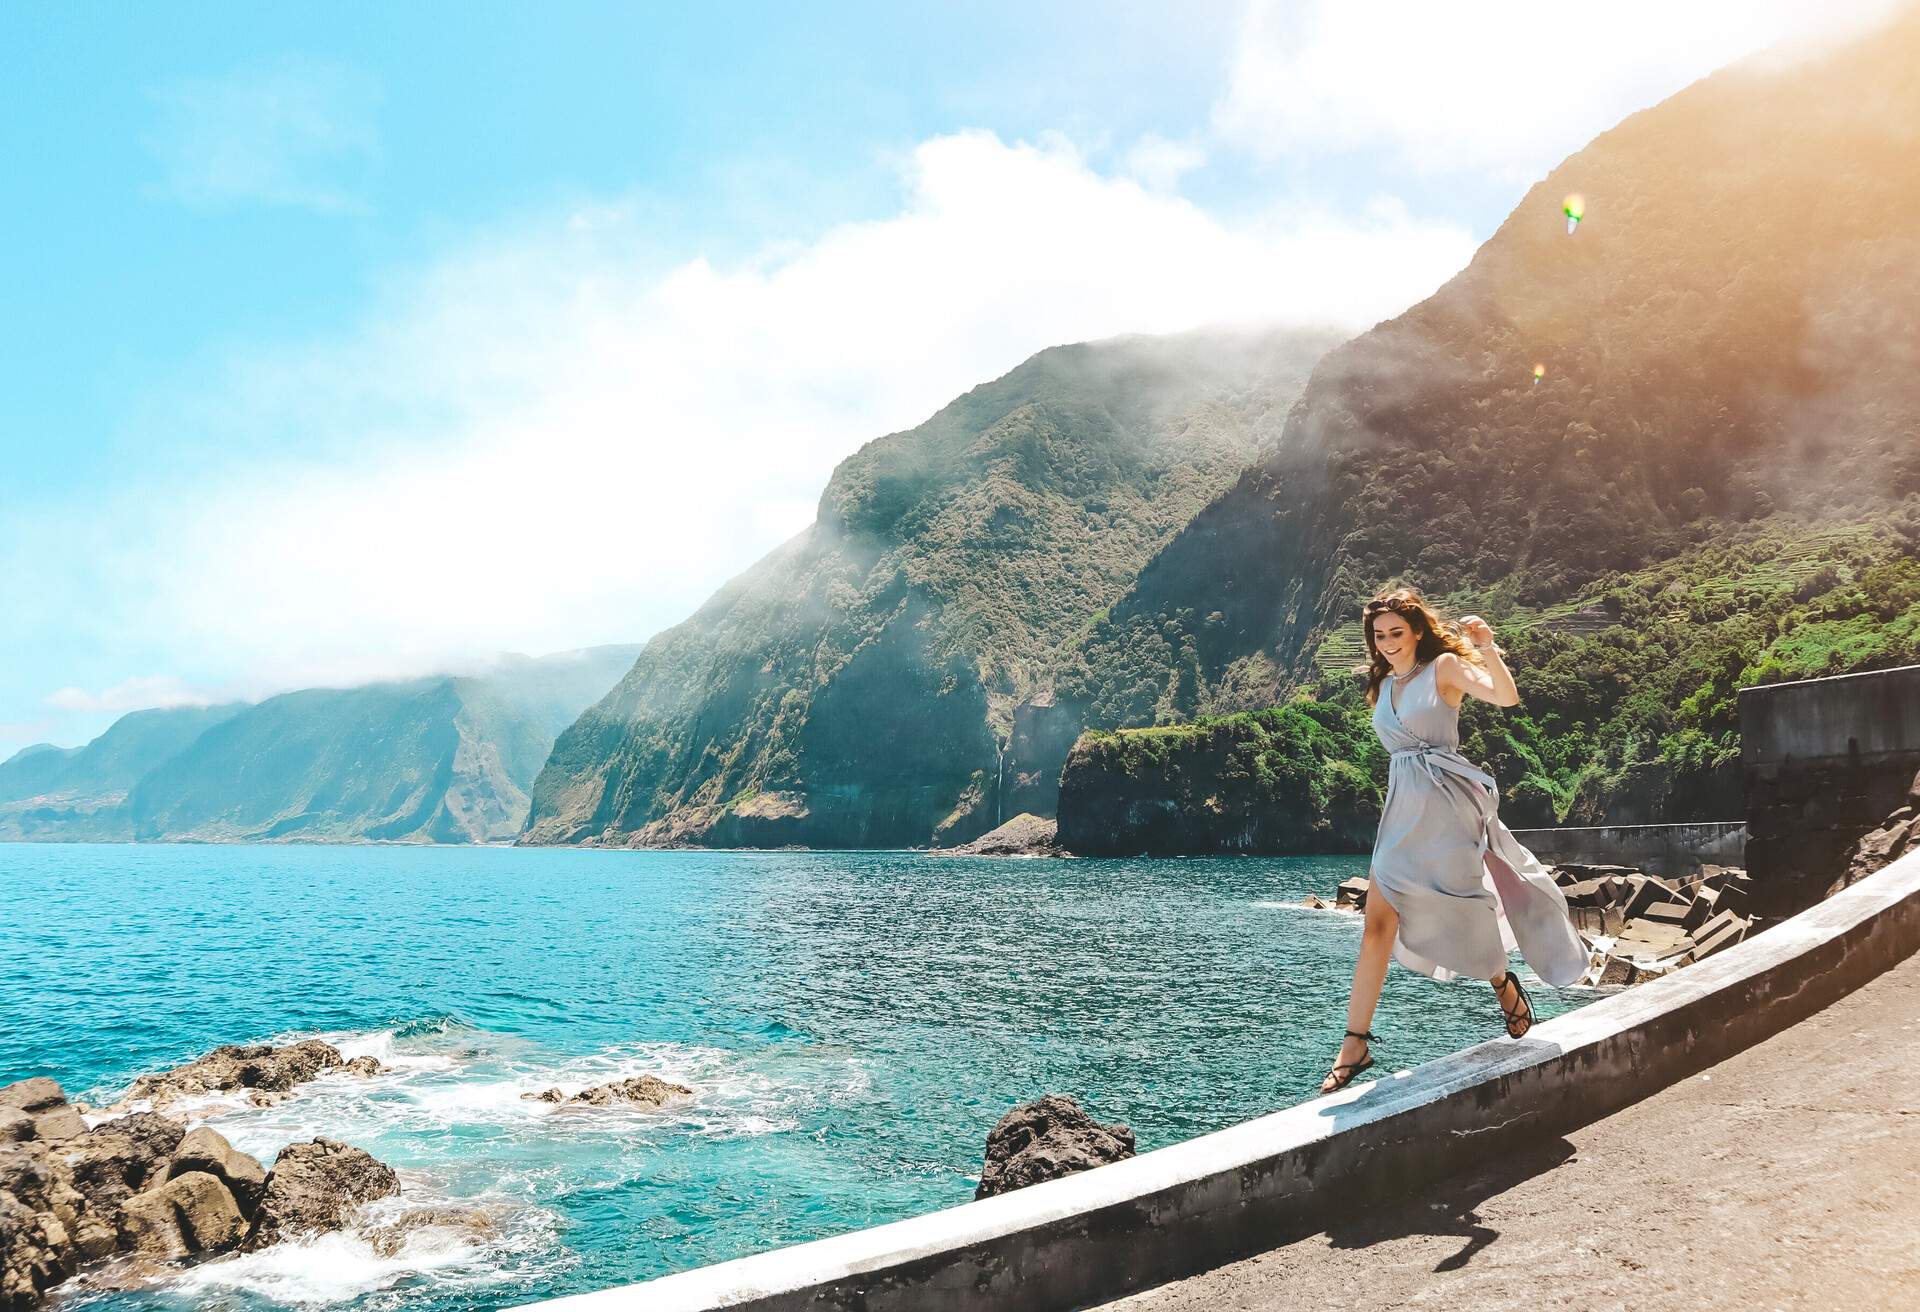 A woman striding cheerfully on a ledge by the sea with mountains in the background.